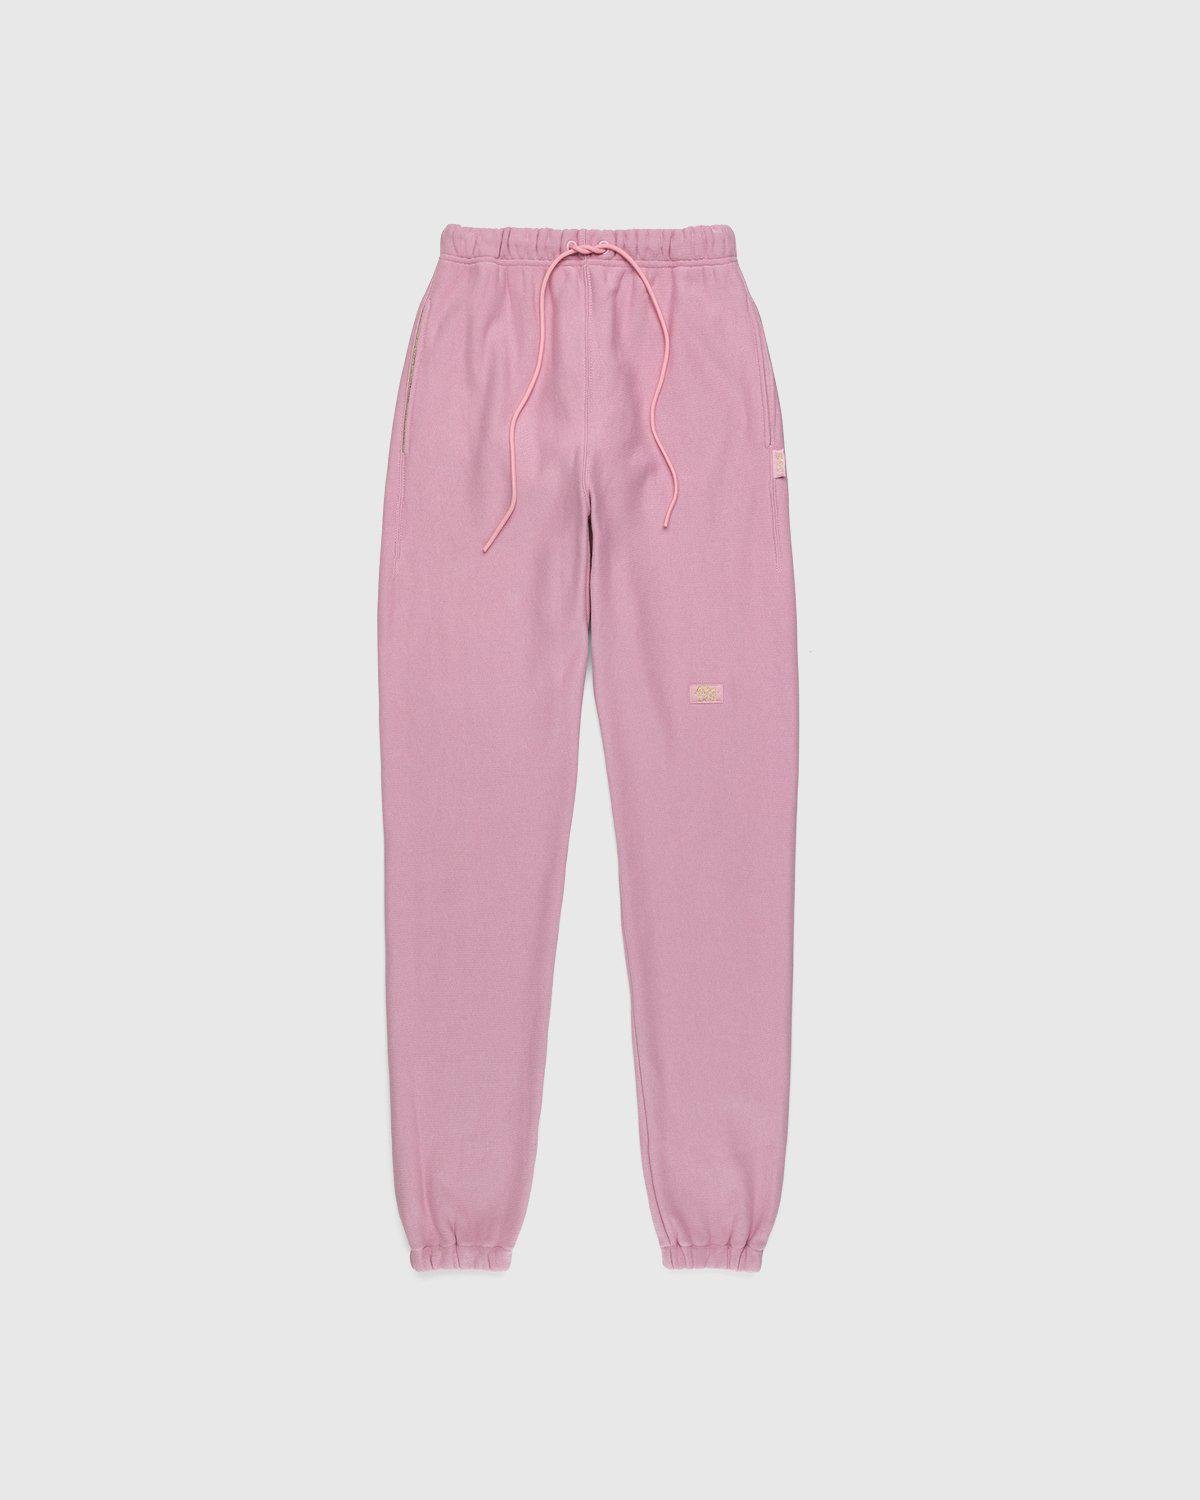 French Terry Sweatpants Morganite by ABC.